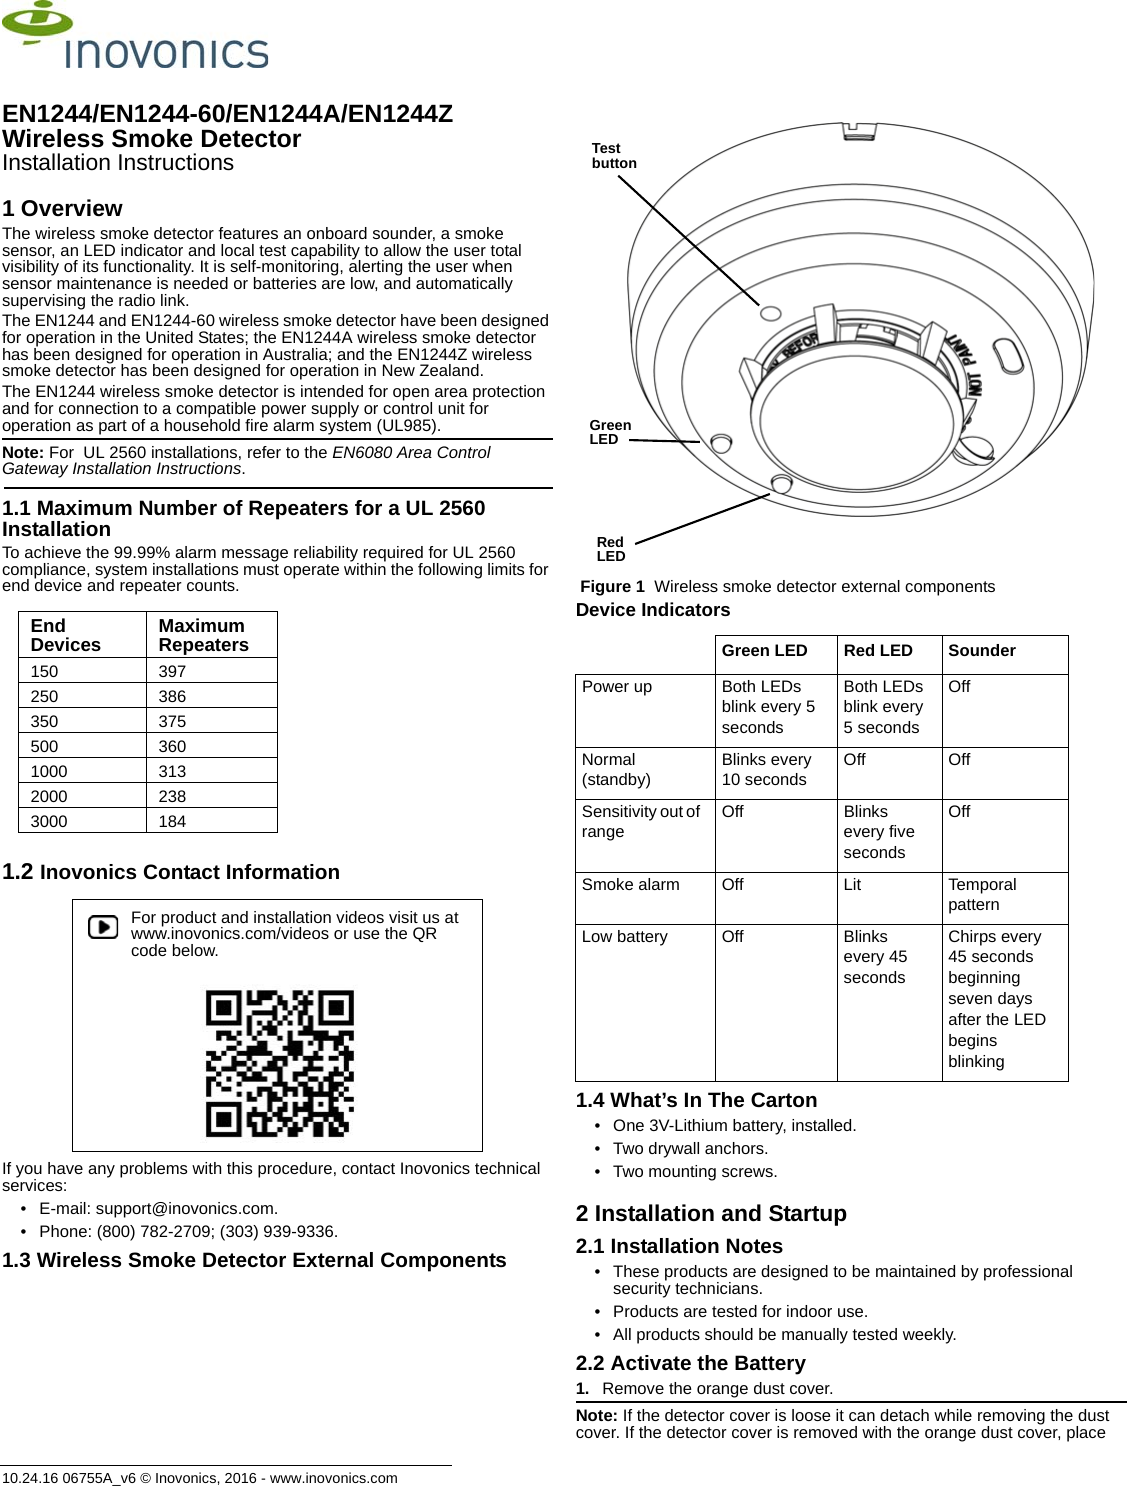 10.24.16 06755A_v6 © Inovonics, 2016 - www.inovonics.comEN1244/EN1244-60/EN1244A/EN1244Z Wireless Smoke DetectorInstallation Instructions1 OverviewThe wireless smoke detector features an onboard sounder, a smoke sensor, an LED indicator and local test capability to allow the user total visibility of its functionality. It is self-monitoring, alerting the user when sensor maintenance is needed or batteries are low, and automatically supervising the radio link.The EN1244 and EN1244-60 wireless smoke detector have been designed for operation in the United States; the EN1244A wireless smoke detector has been designed for operation in Australia; and the EN1244Z wireless smoke detector has been designed for operation in New Zealand. The EN1244 wireless smoke detector is intended for open area protection and for connection to a compatible power supply or control unit for operation as part of a household fire alarm system (UL985).Note: For  UL 2560 installations, refer to the EN6080 Area Control Gateway Installation Instructions.1.1 Maximum Number of Repeaters for a UL 2560 InstallationTo achieve the 99.99% alarm message reliability required for UL 2560 compliance, system installations must operate within the following limits for end device and repeater counts.1.2 Inovonics Contact InformationIf you have any problems with this procedure, contact Inovonics technical services:• E-mail: support@inovonics.com.• Phone: (800) 782-2709; (303) 939-9336.1.3 Wireless Smoke Detector External Components Figure 1  Wireless smoke detector external componentsDevice Indicators1.4 What’s In The Carton• One 3V-Lithium battery, installed.• Two drywall anchors.• Two mounting screws.2 Installation and Startup2.1 Installation Notes• These products are designed to be maintained by professional security technicians.• Products are tested for indoor use.• All products should be manually tested weekly.2.2 Activate the Battery1. Remove the orange dust cover.Note: If the detector cover is loose it can detach while removing the dust cover. If the detector cover is removed with the orange dust cover, place End Devices Maximum Repeaters150 397250 386350 375500 3601000 3132000 2383000 184For product and installation videos visit us at www.inovonics.com/videos or use the QR code below.Green LED Red LED SounderPower up Both LEDs blink every 5 secondsBoth LEDs blink every 5 secondsOffNormal (standby)Blinks every 10 secondsOff OffSensitivity out of rangeOff Blinks every five secondsOffSmoke alarm Off Lit Temporal patternLow battery Off Blinks every 45 secondsChirps every 45 seconds beginning seven days after the LED begins blinkingTest buttonGreen LEDRed LED